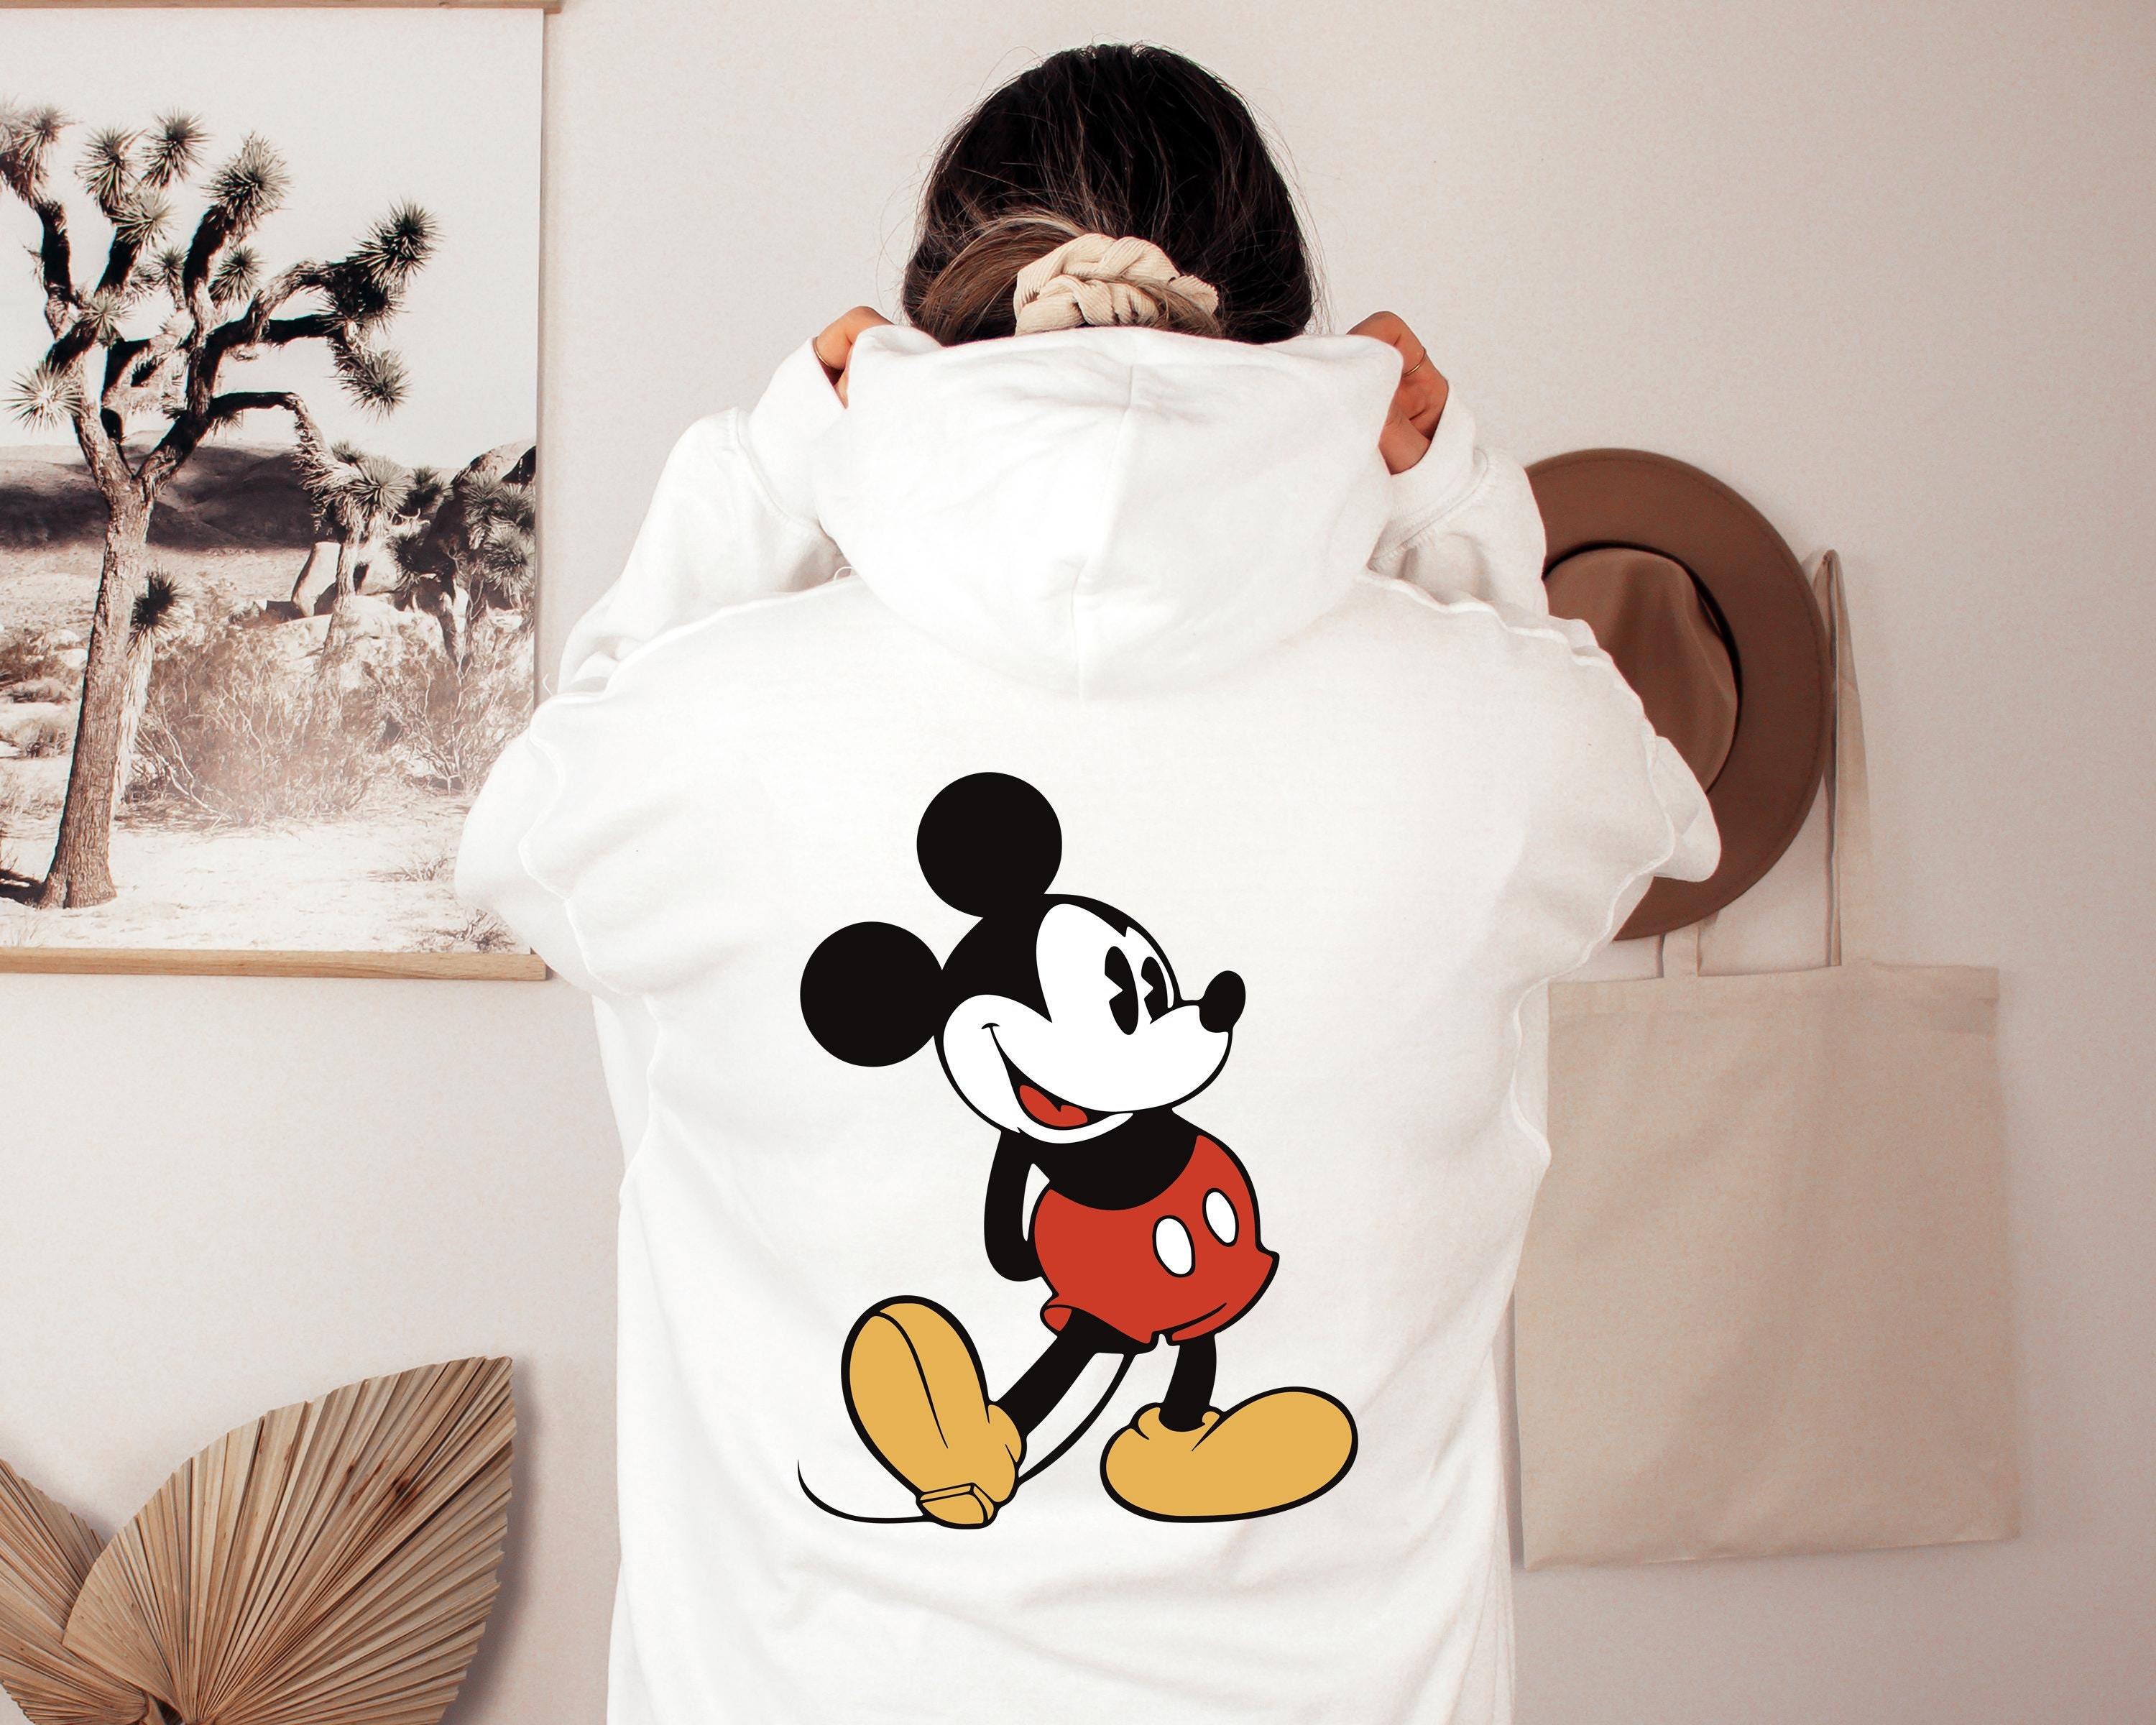 100% Authentic GUCCI x Disney Micky Mouse Jacquard Sweater Size: XXL